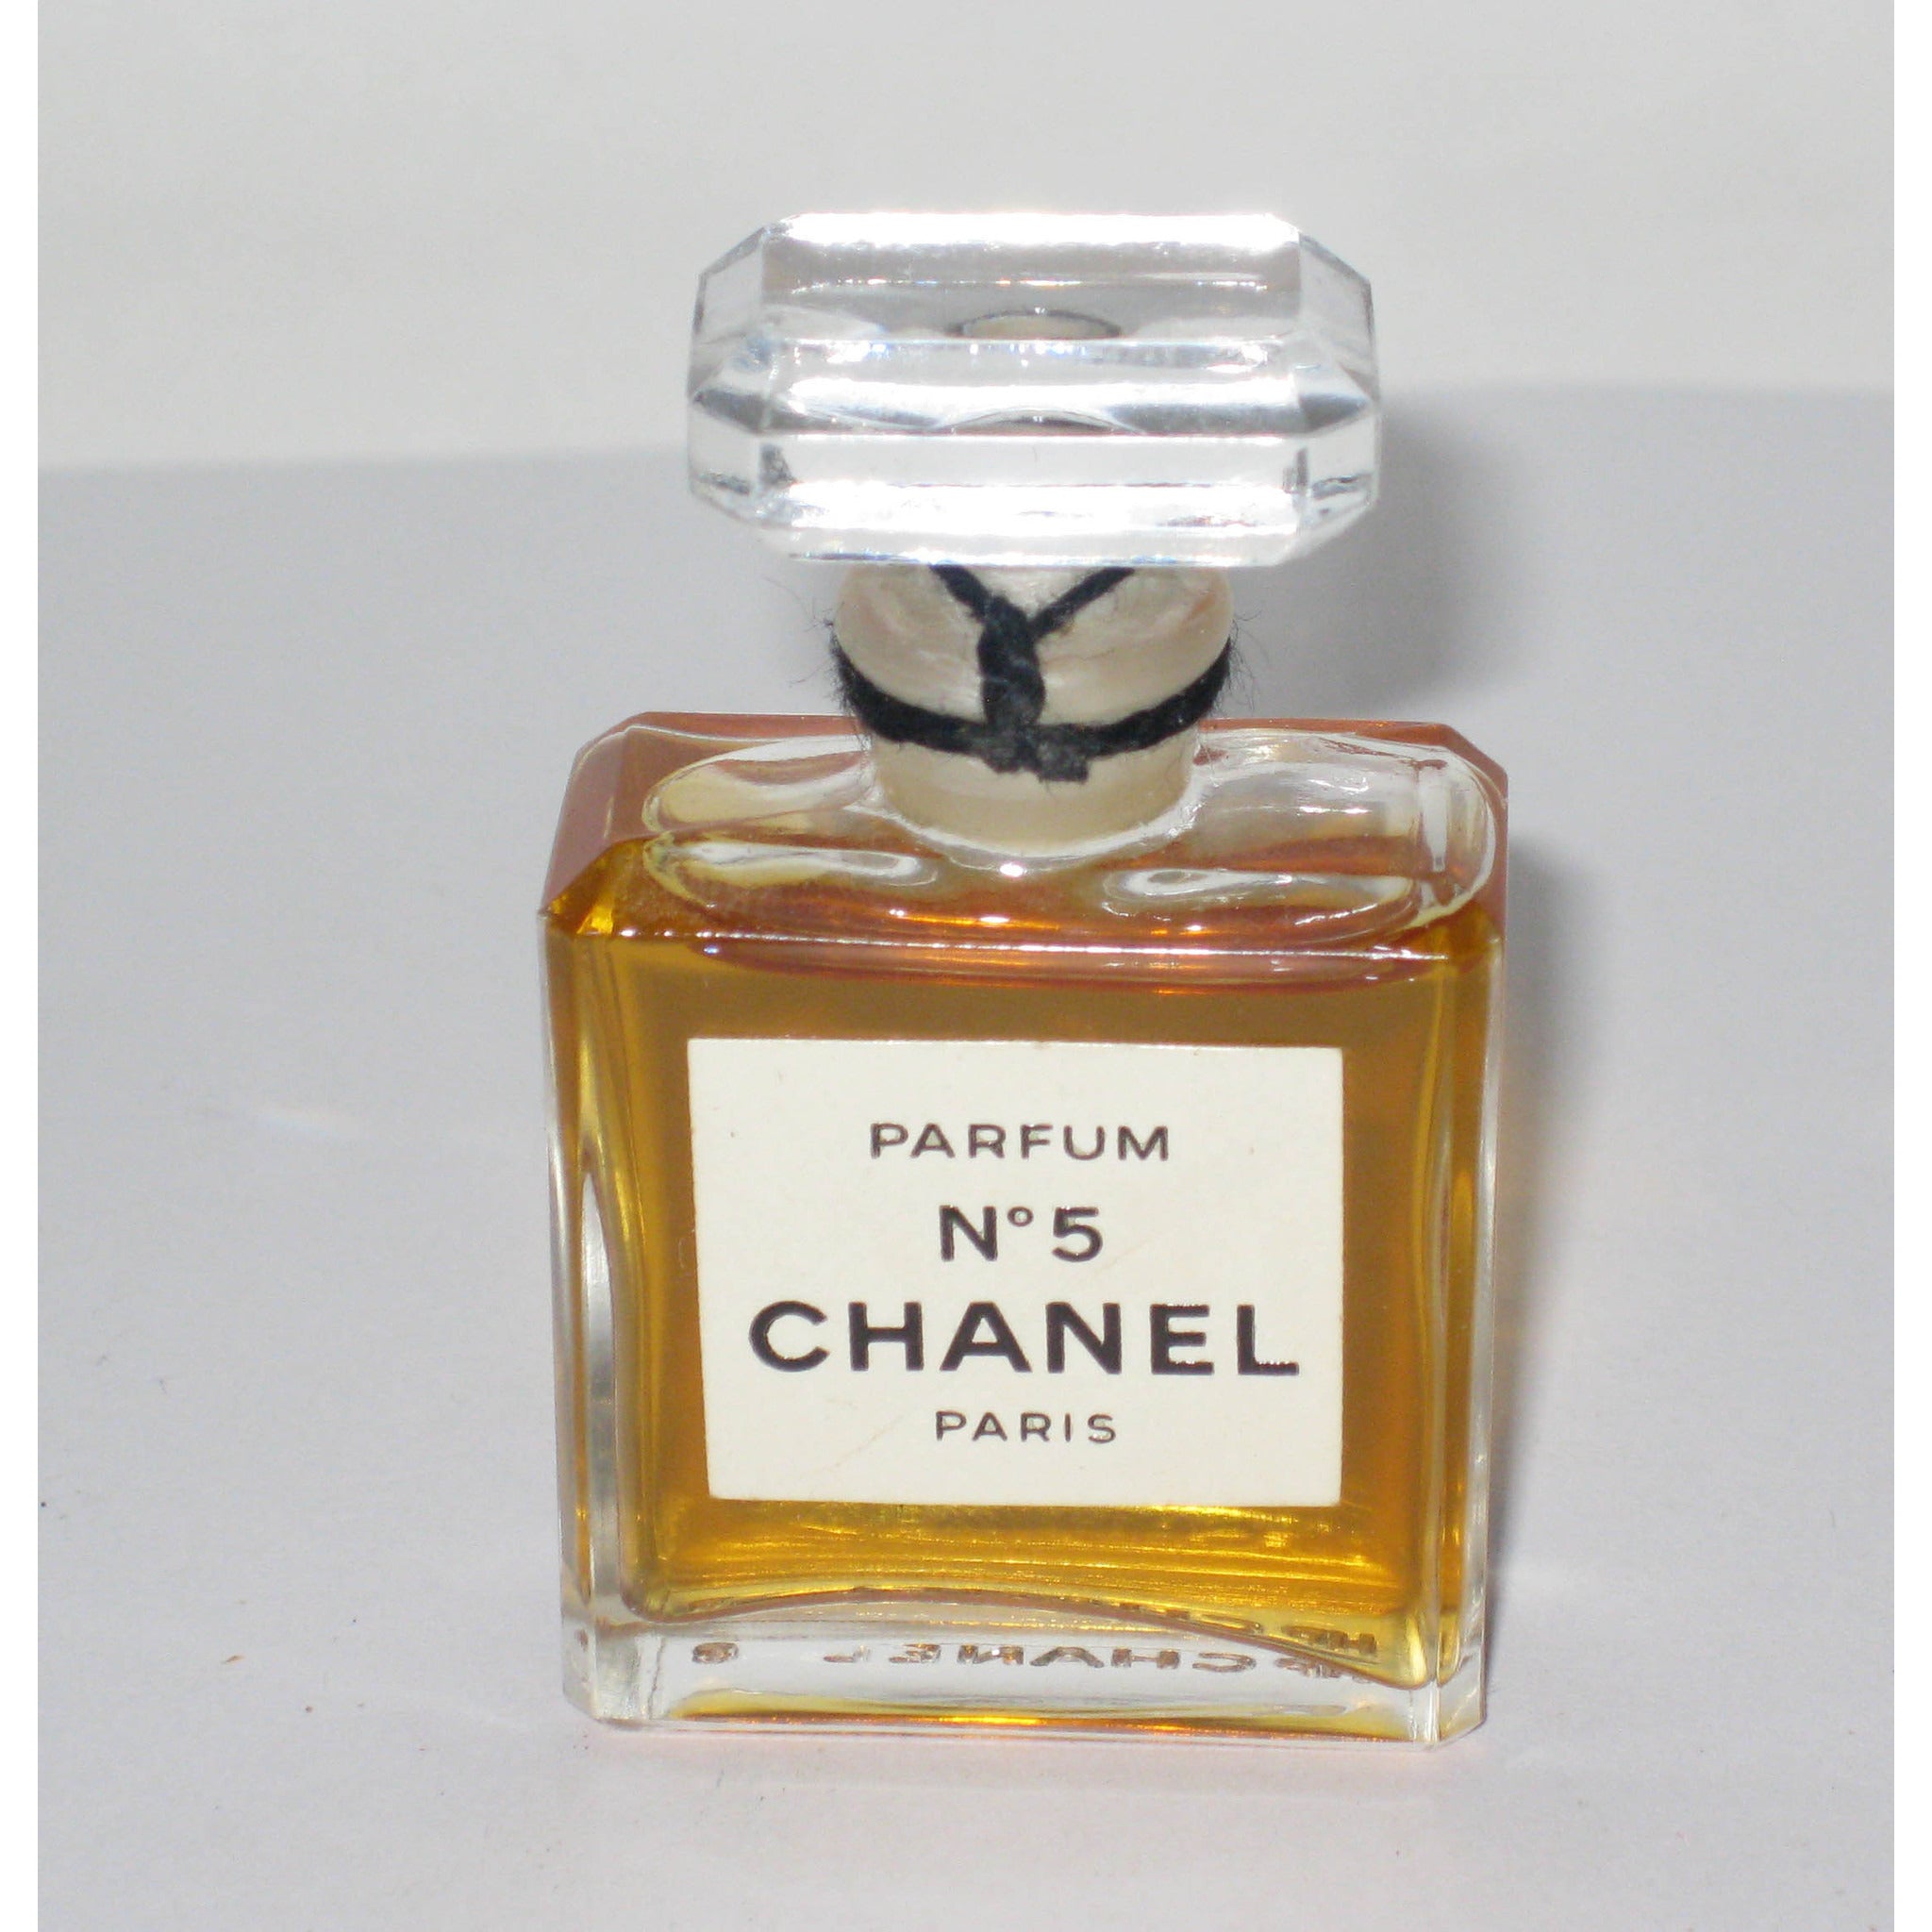 Chanel No 5 Perfume – Quirky Finds